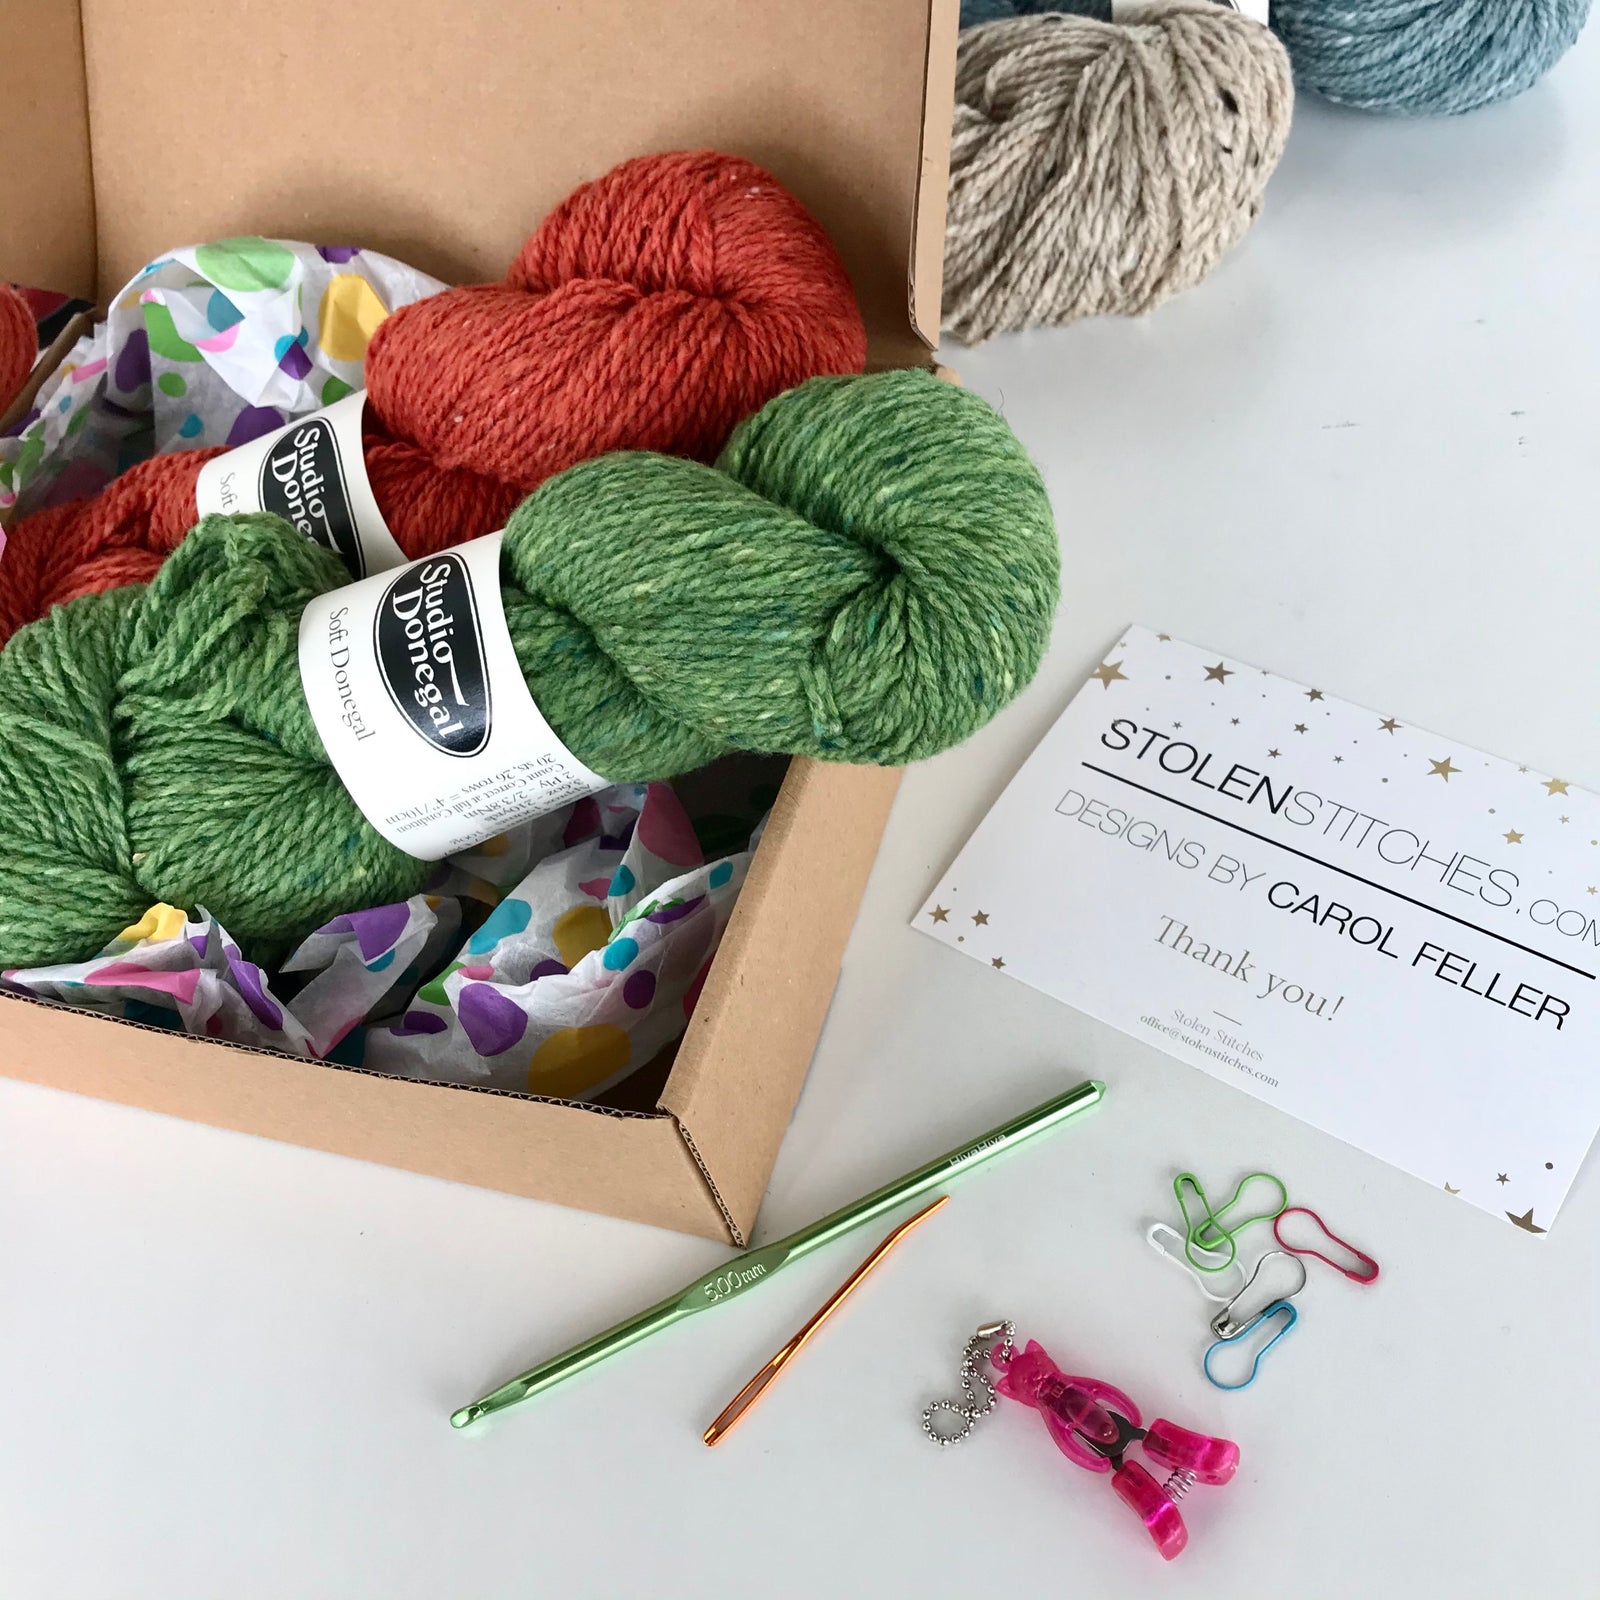 Knitting Supplies You Probably Already Have Around the House